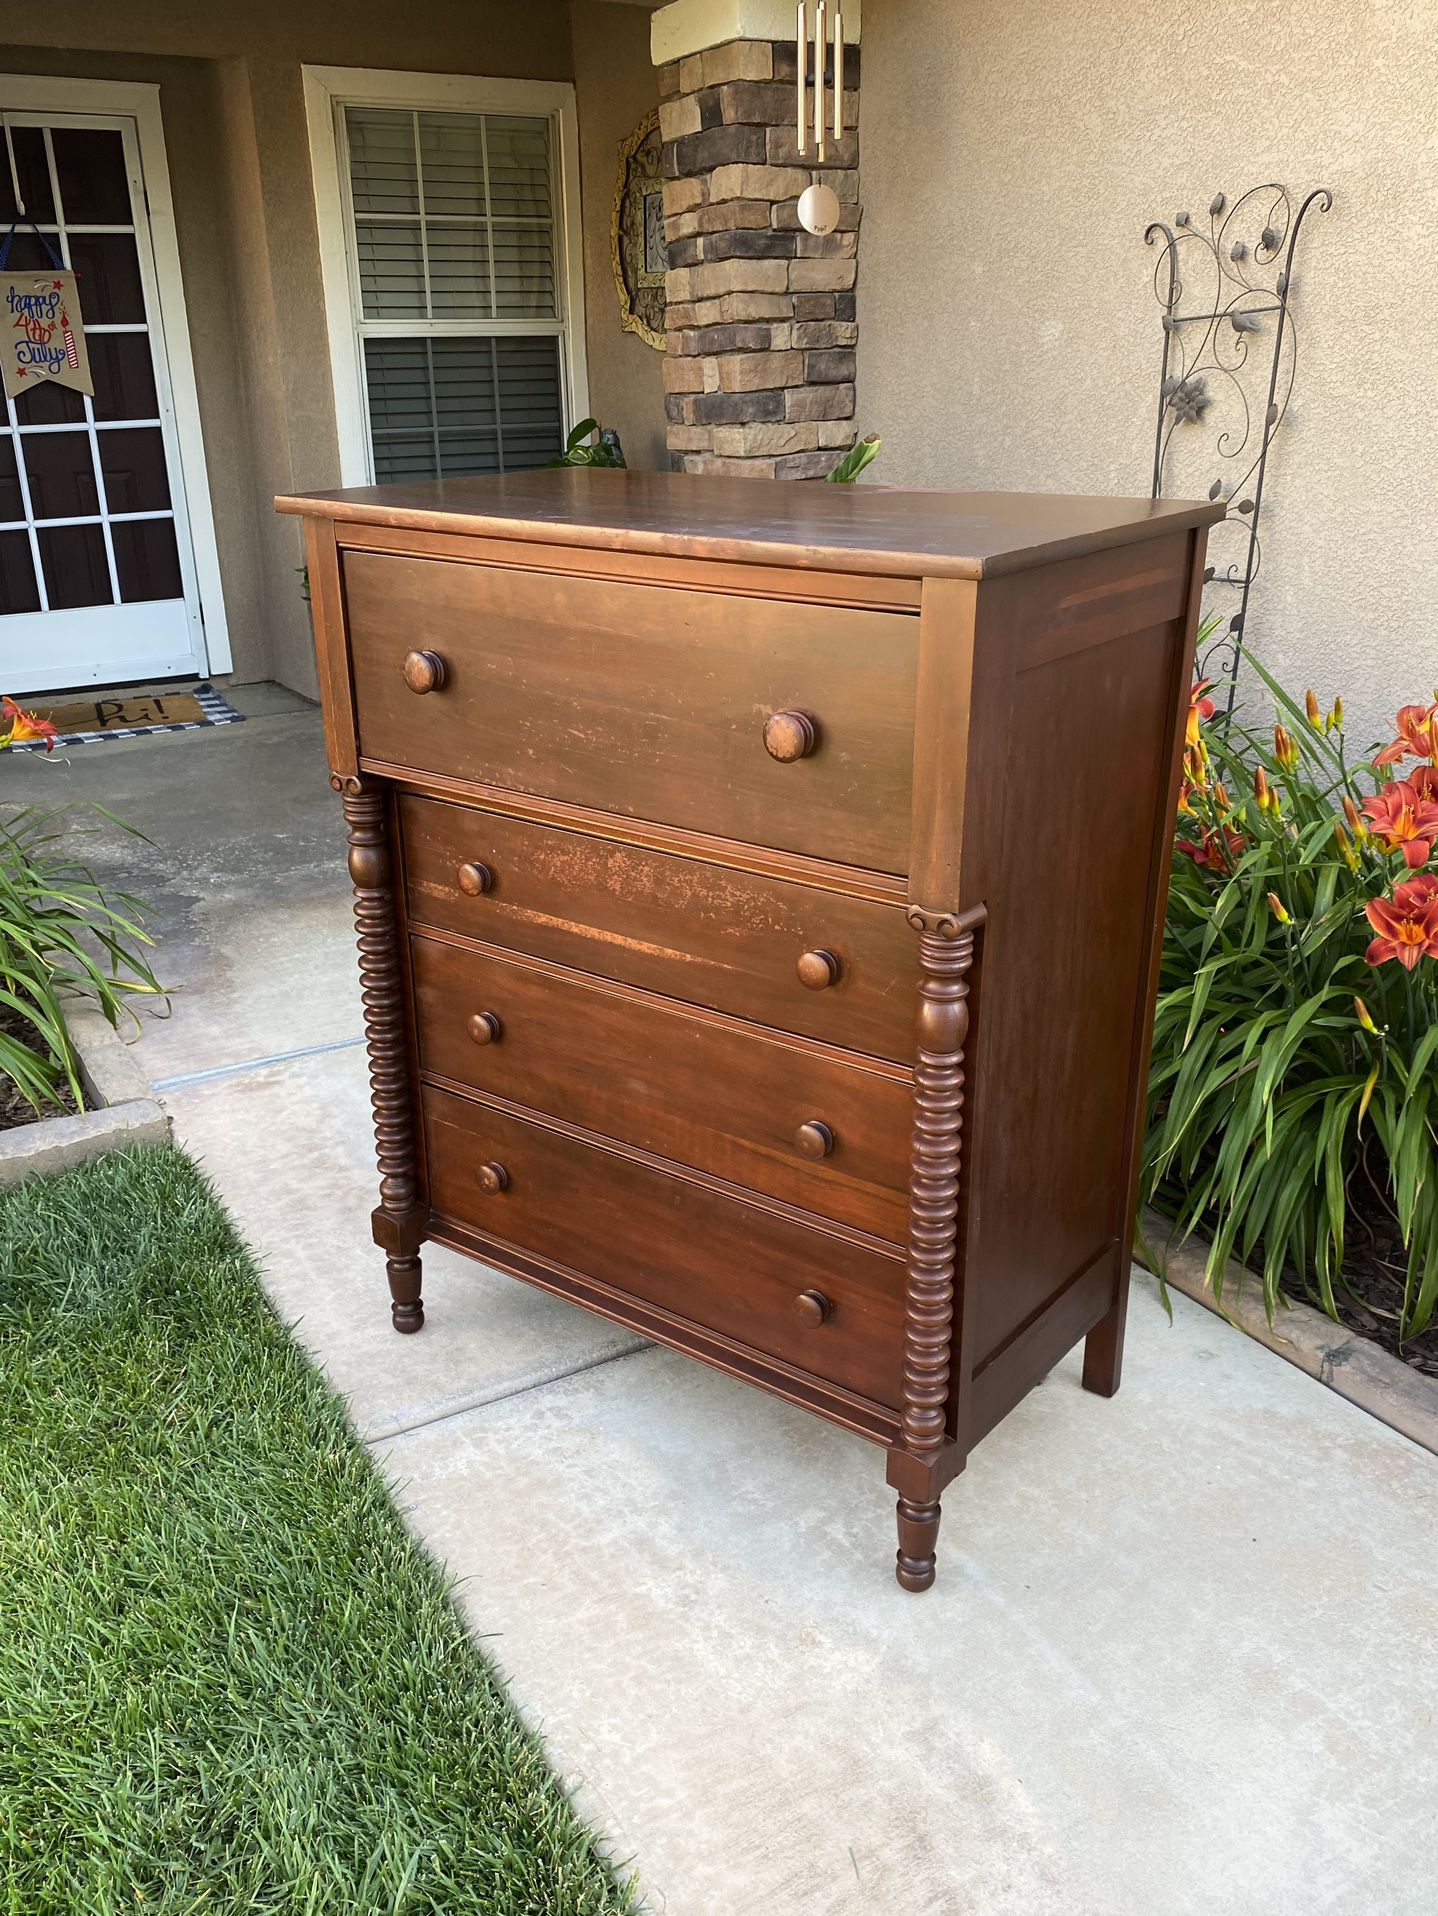 ANTIQUE “PARK FURNITURE CO” 4DR. VICTORIAN STYLE EMPIRE CHEST OF DRAWERS (CIRCA 30’S/40’S)